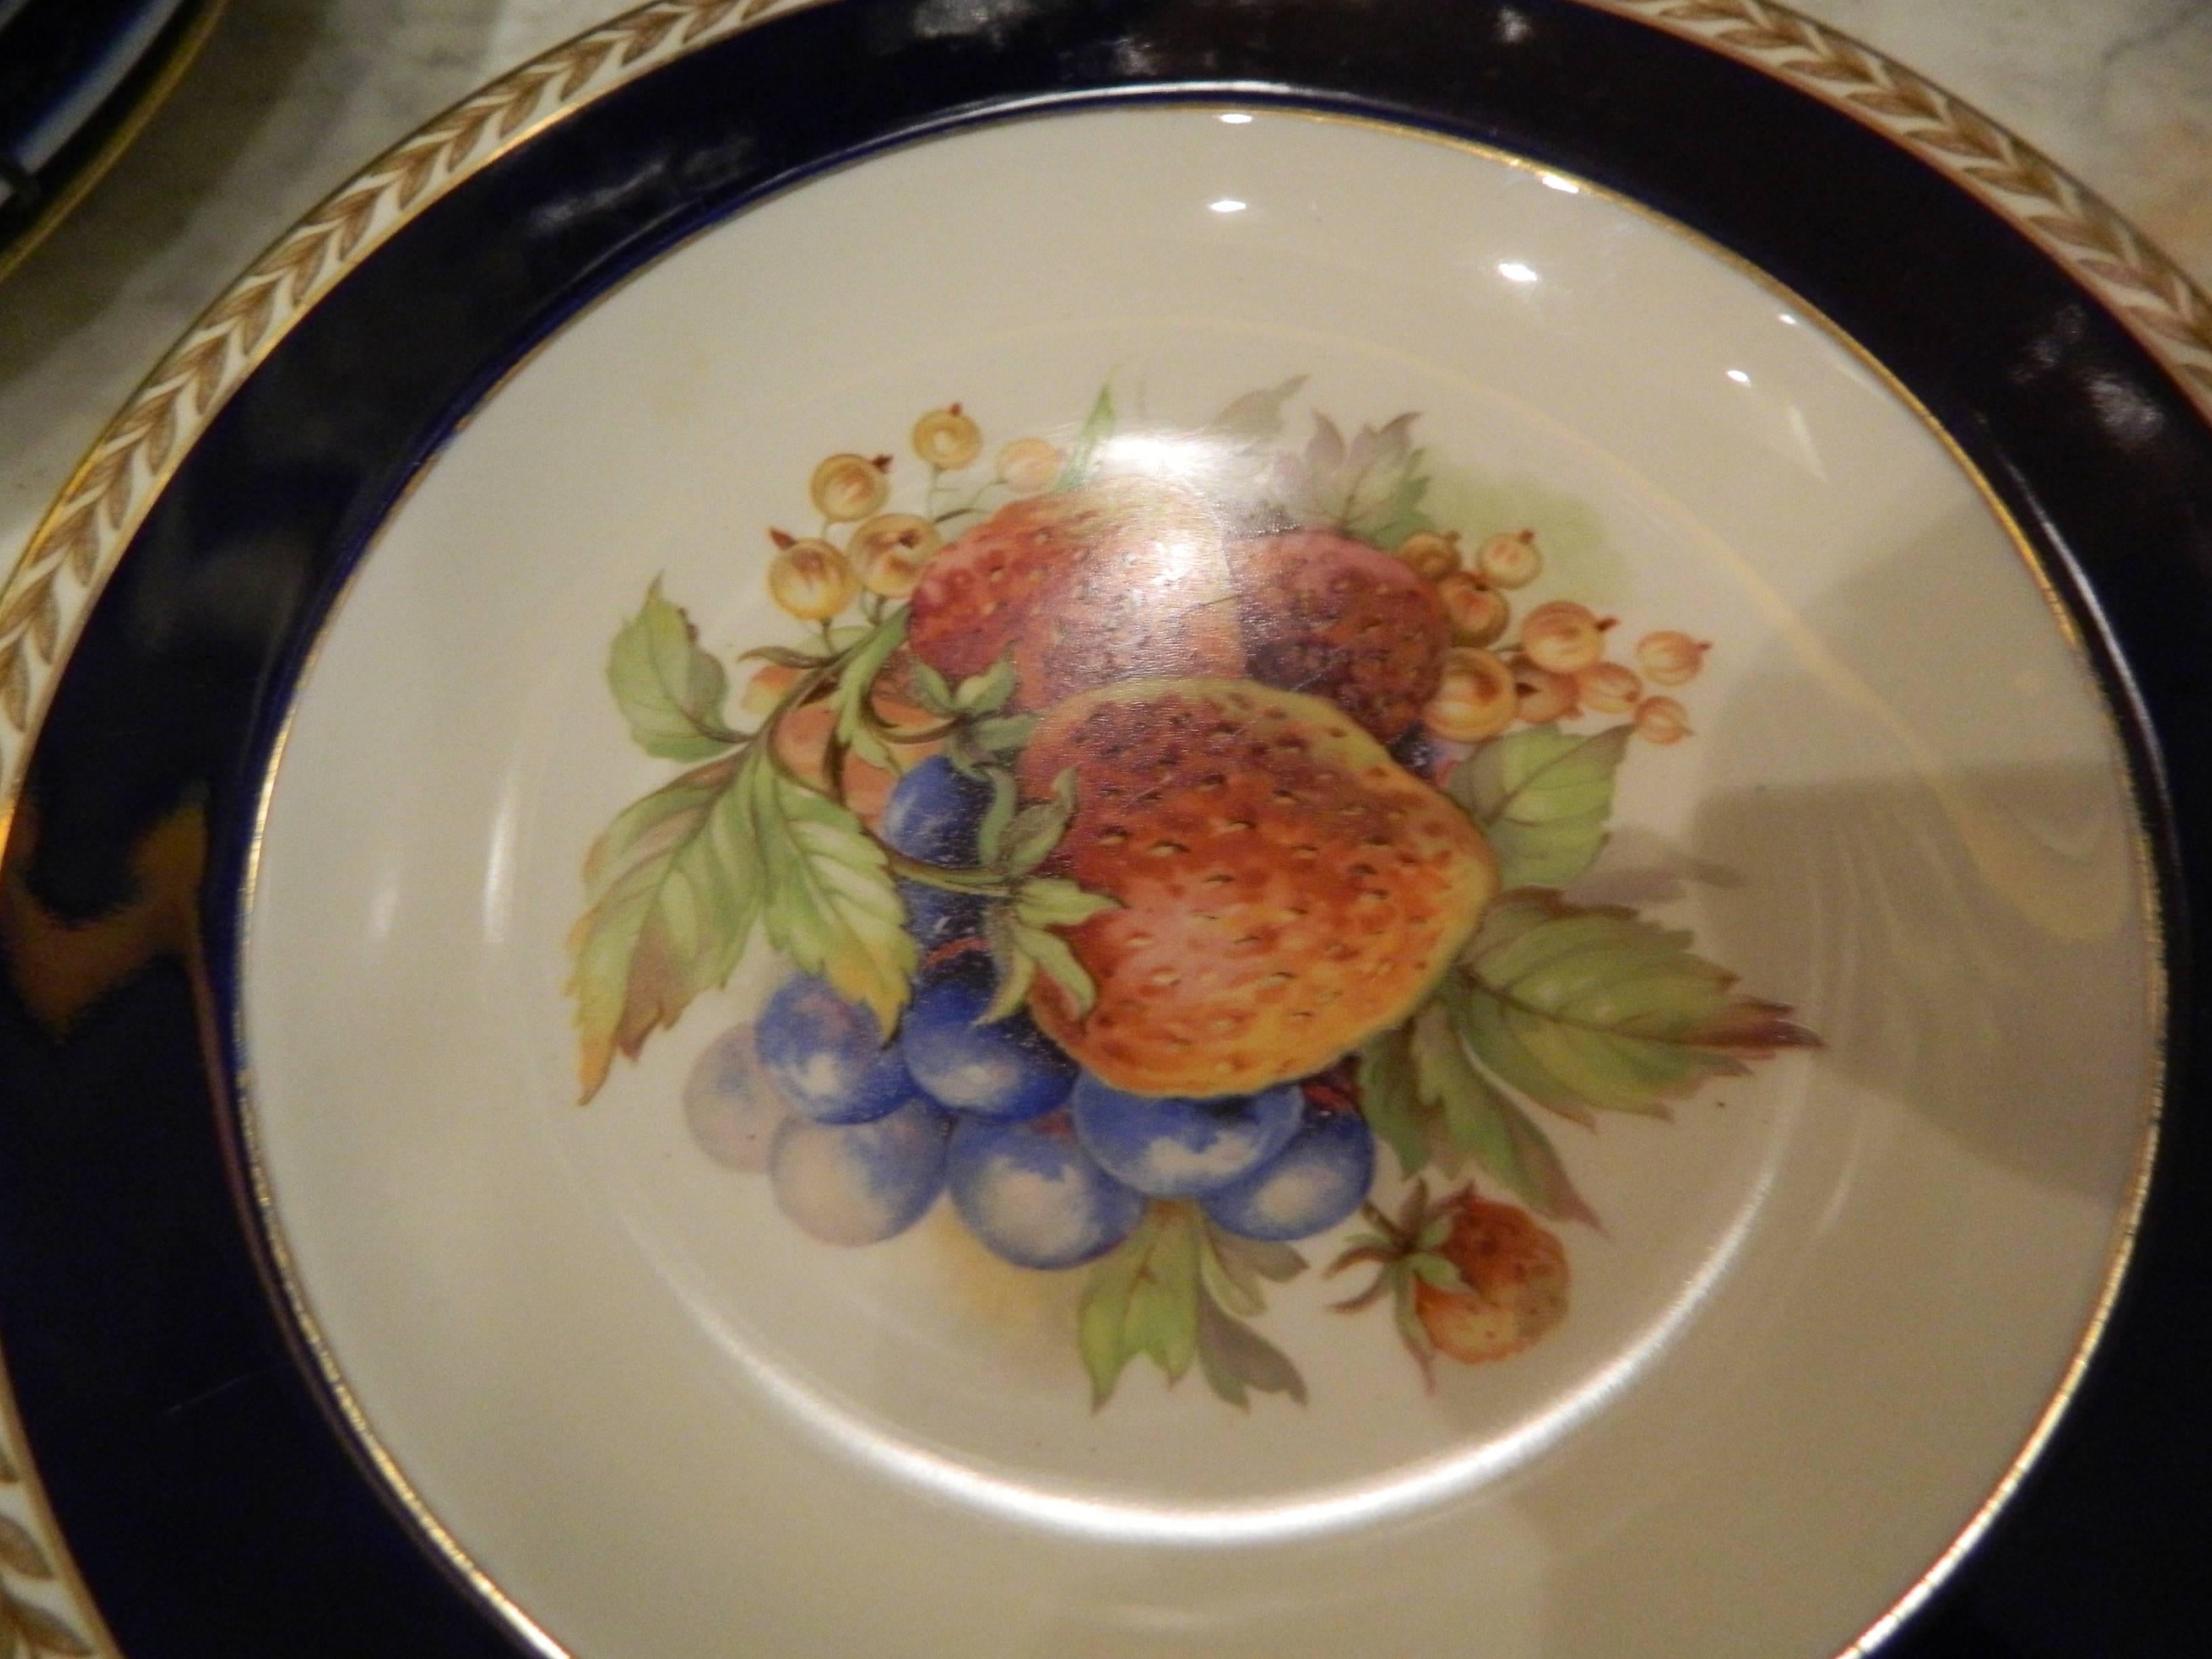 Set of seven Crown Ducal dessert plates, 20th century. Made in England. Cobalt blue rim luncheon plate with a gold laurel rim. Peaches and grapes motif center.